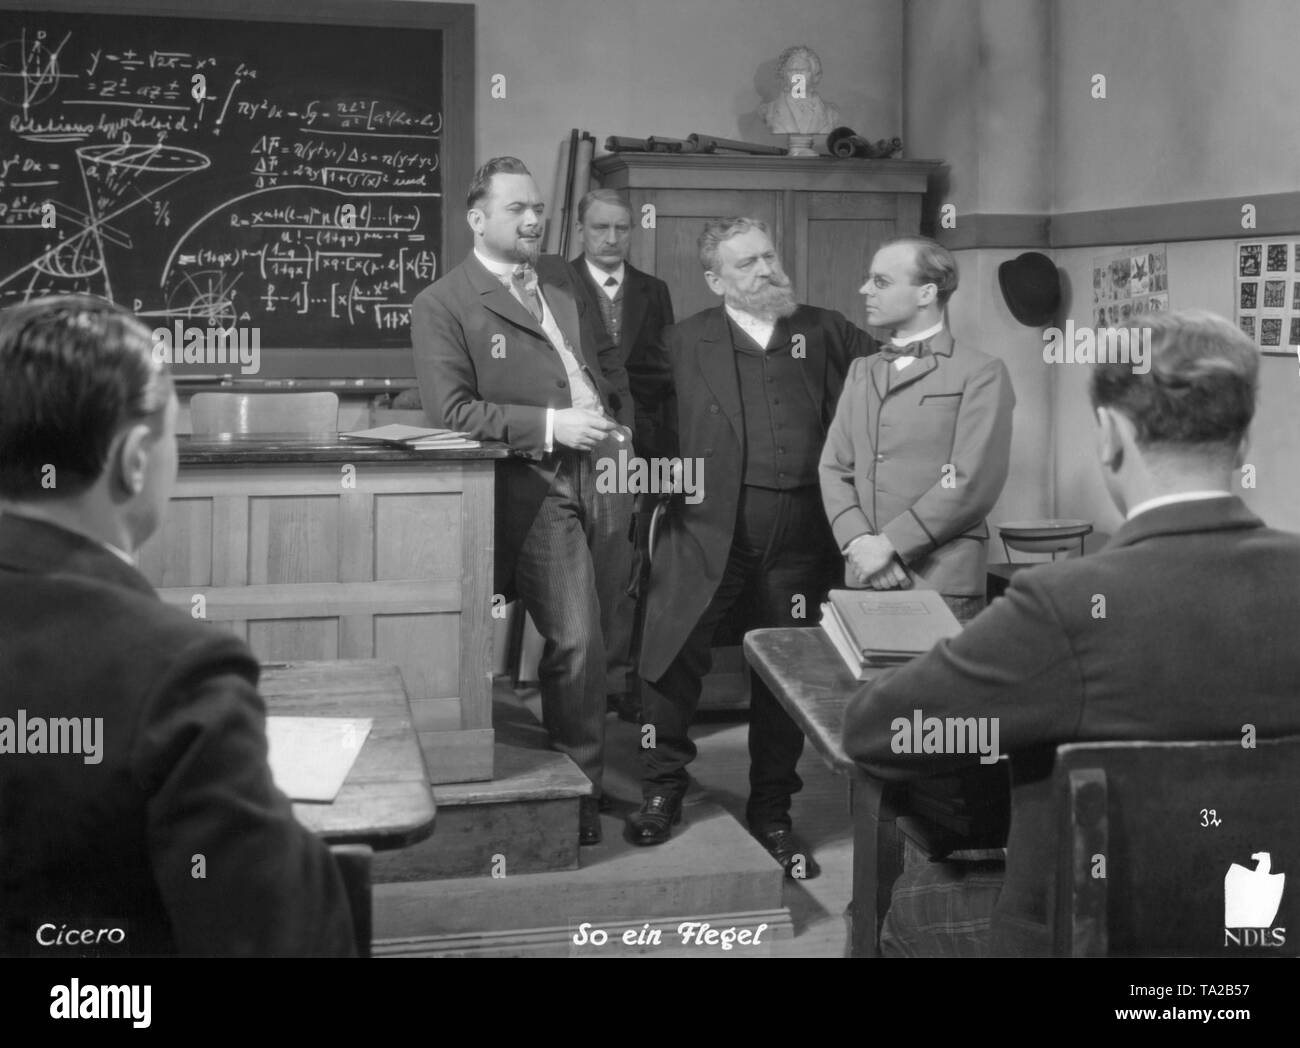 Heinz Ruehmann (right) as Dr. med. Hans Pfeiffer / Erich Pfeiffer, Jakob Tiedtke as Rector Knauer (center), Oskar Sima as Professor Crey (left) and in the background Karl Platen as janitor Oertel in the comedy 'So ein Flegel' by Robert Stemmle. This was the first film adaptation of the Feuerzangenbowle by Heinrich Spoerl. Stock Photo